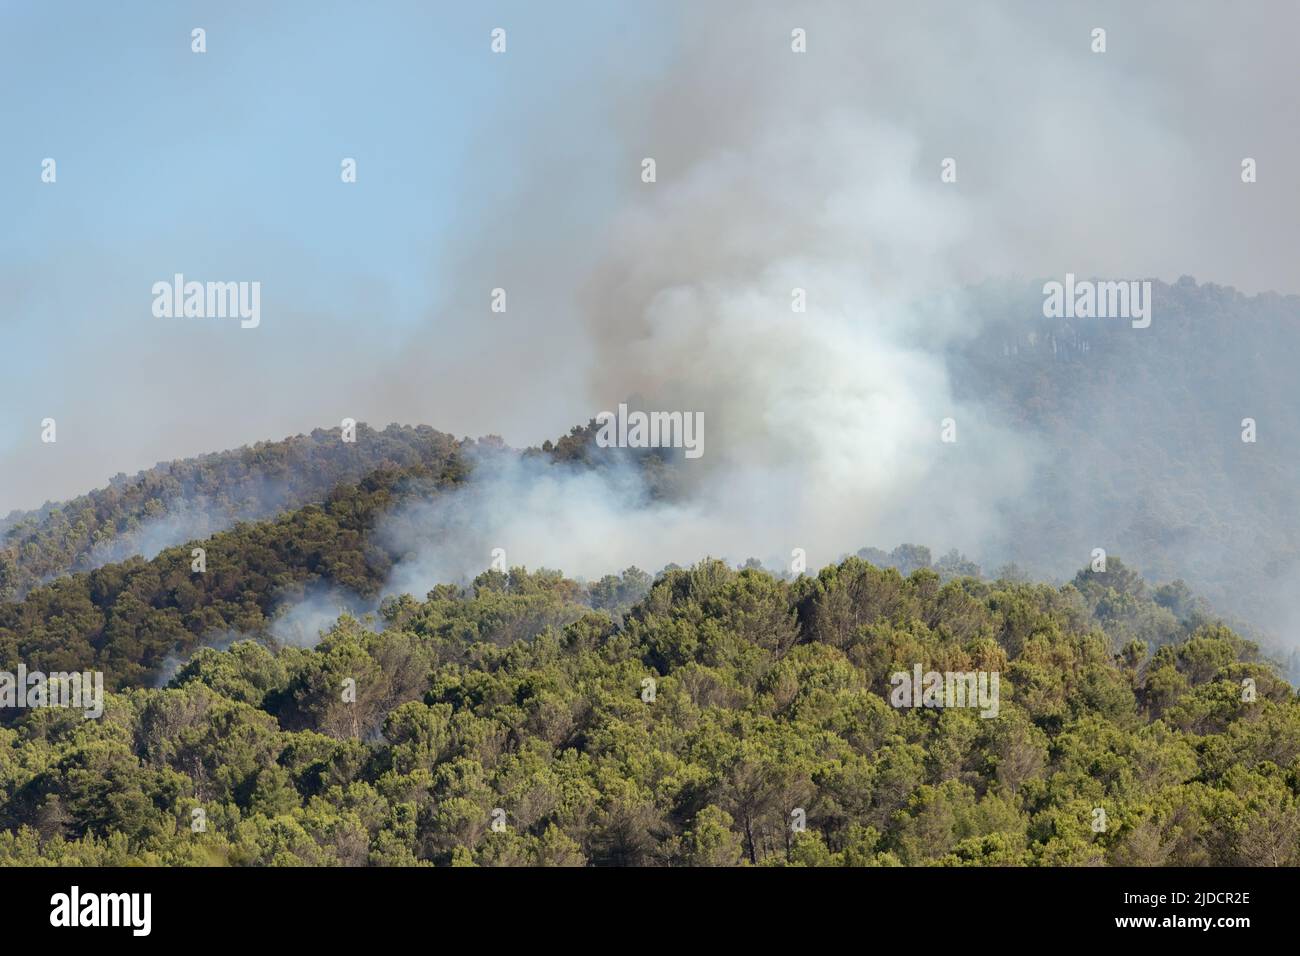 Large column of smoke from a fire advancing towards the municipality of Guirguillano in Navarre, Spain. Forest burning with great intensity. June 2022 Stock Photo